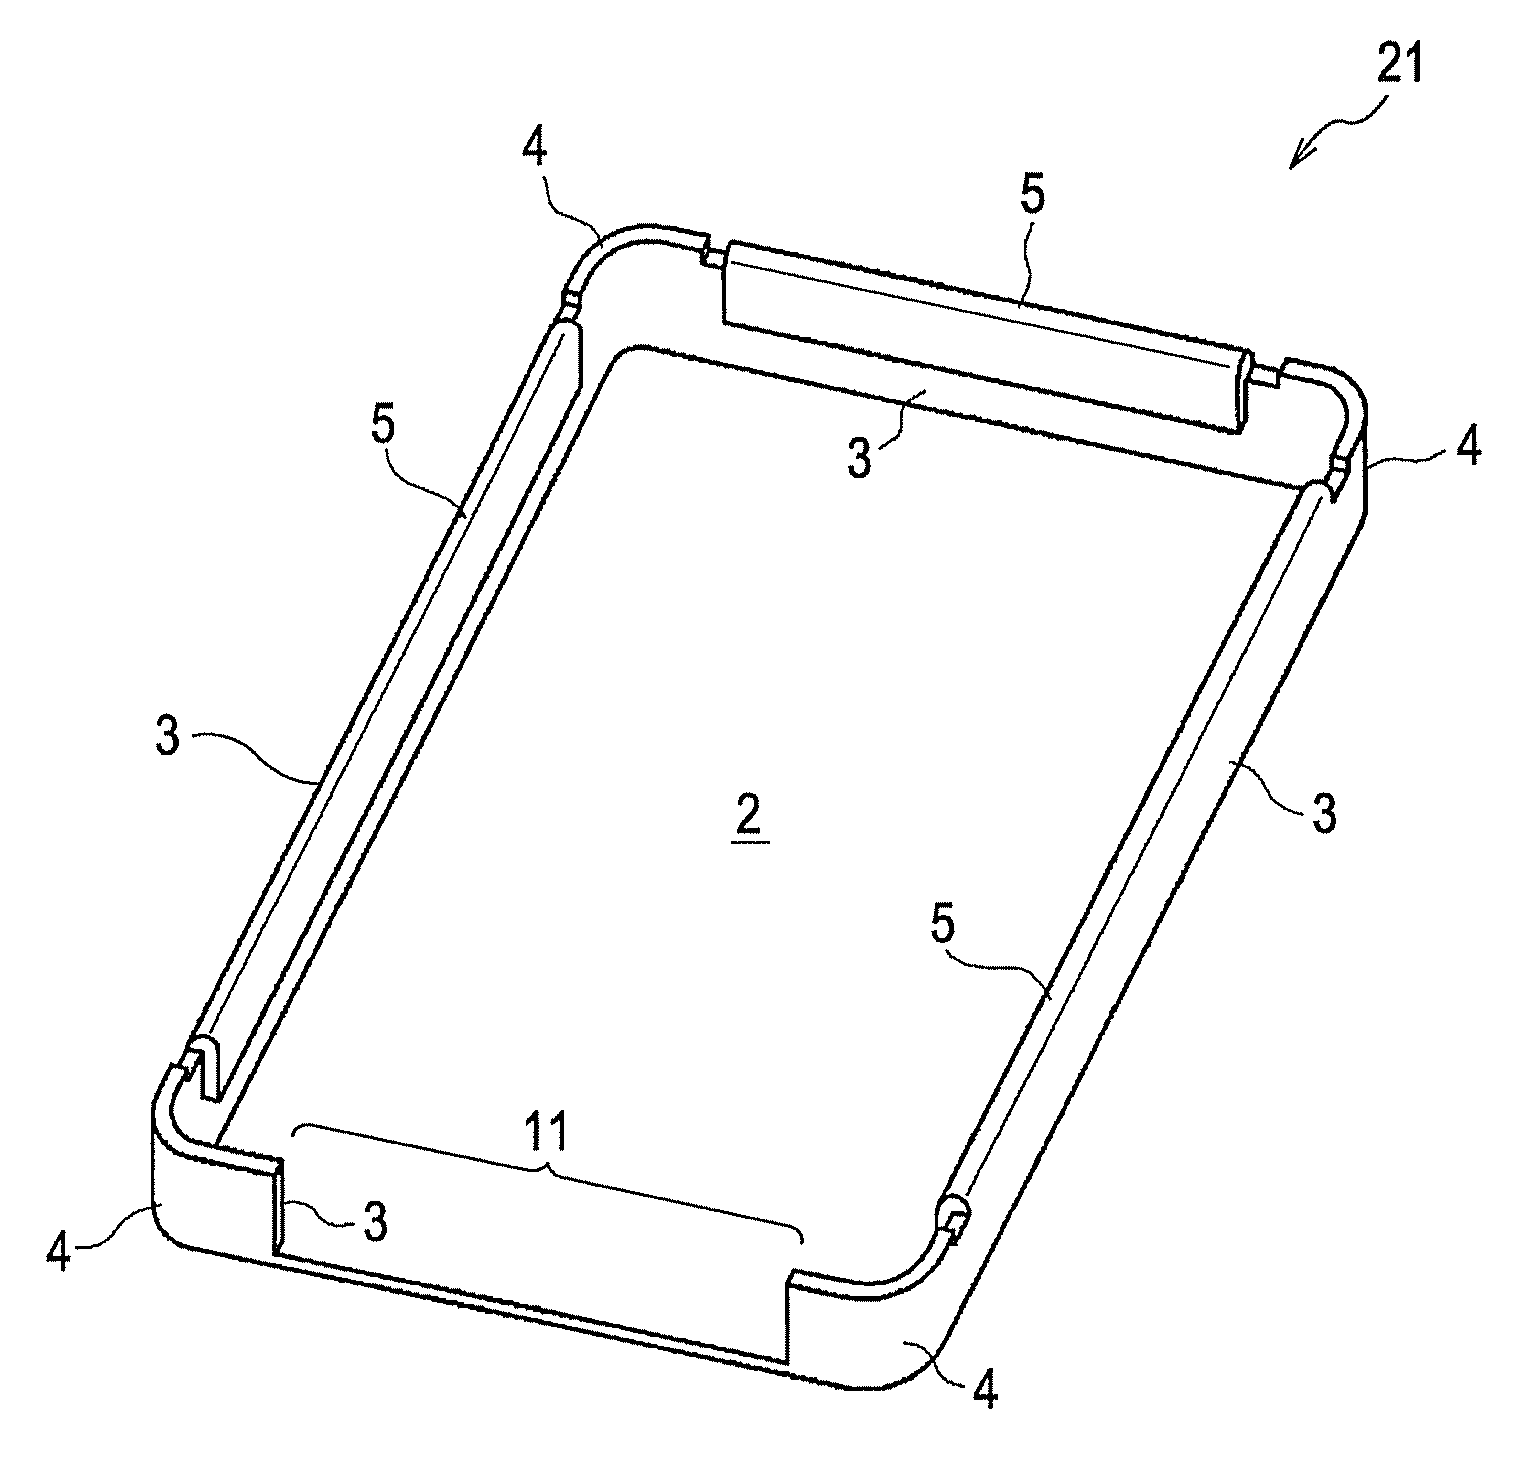 Metal frame for electro-optical device having a folding portion and a seamless curved shape